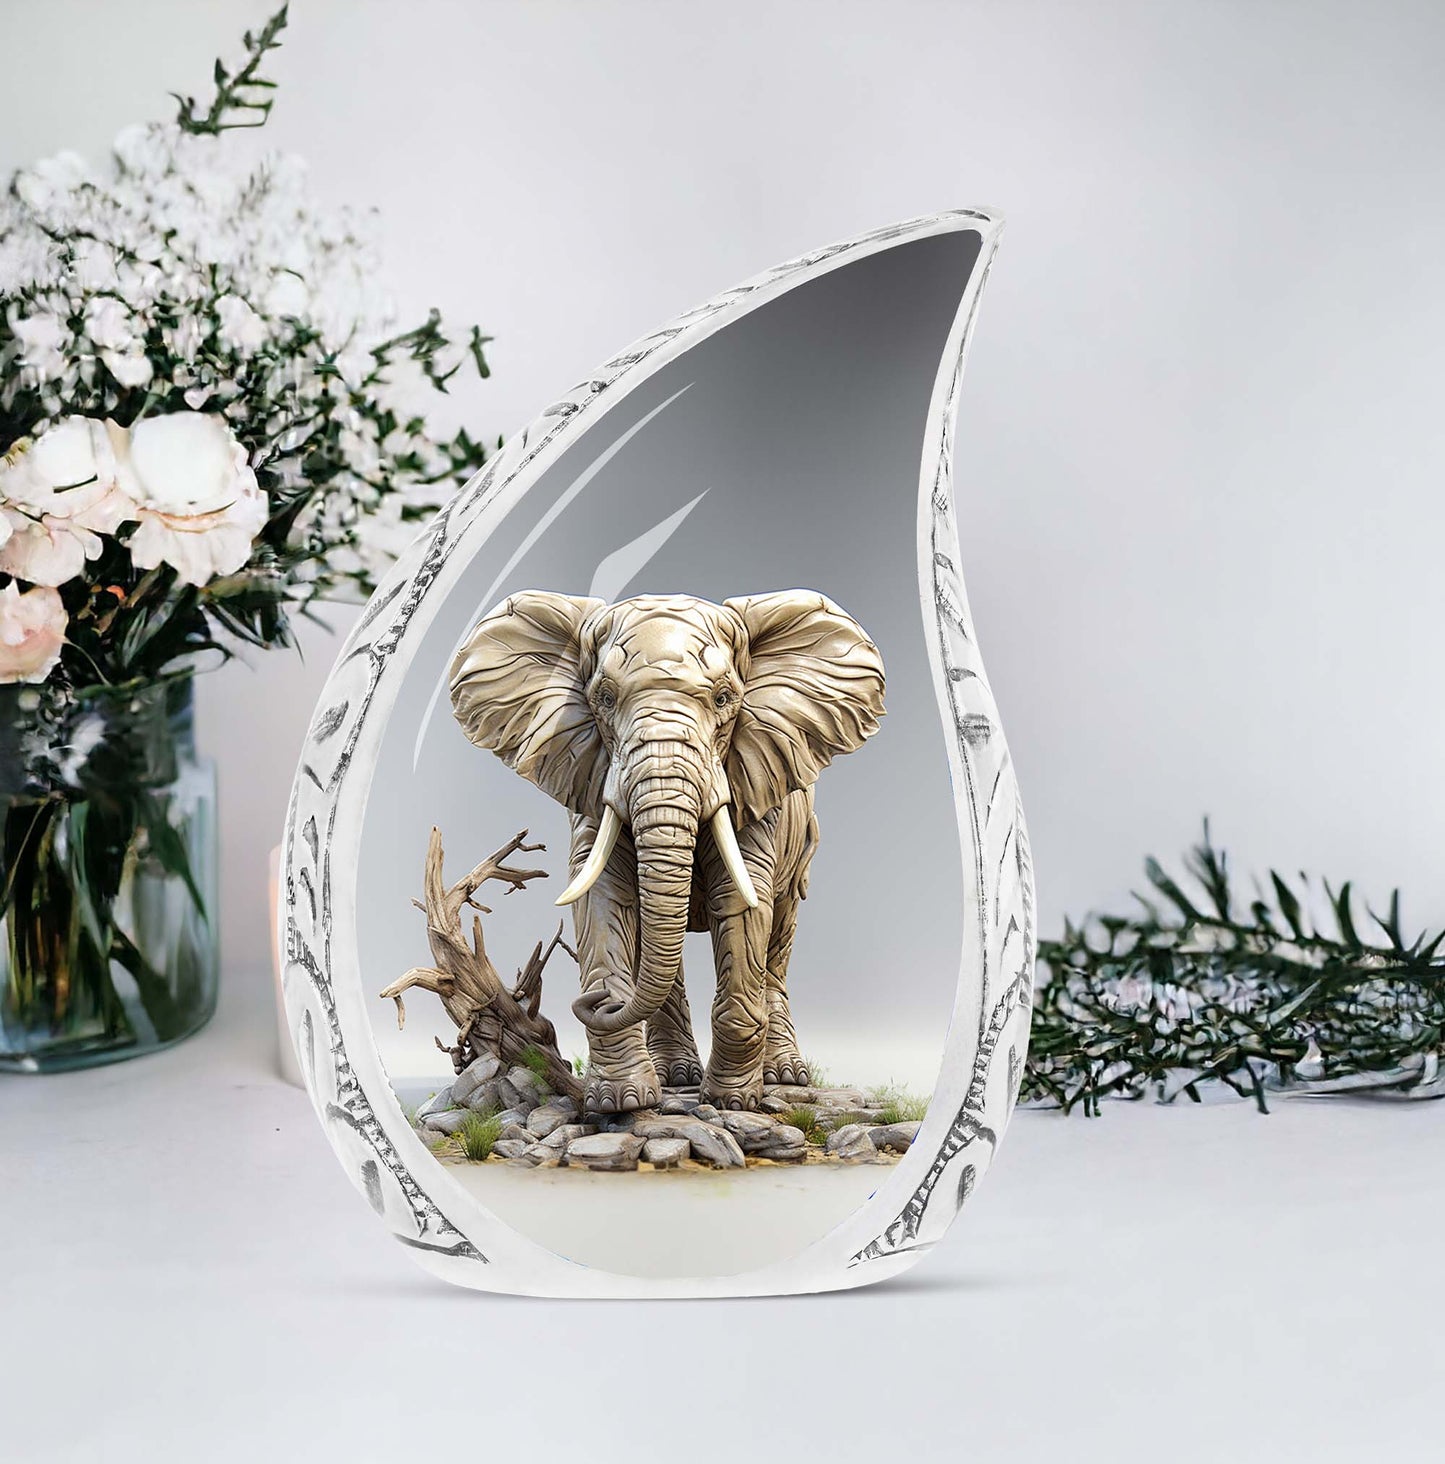 10-inch Large Funeral Urn, Elephant-themed, covered in mud design with 200 cubic inches capacity, ideal for human ashes